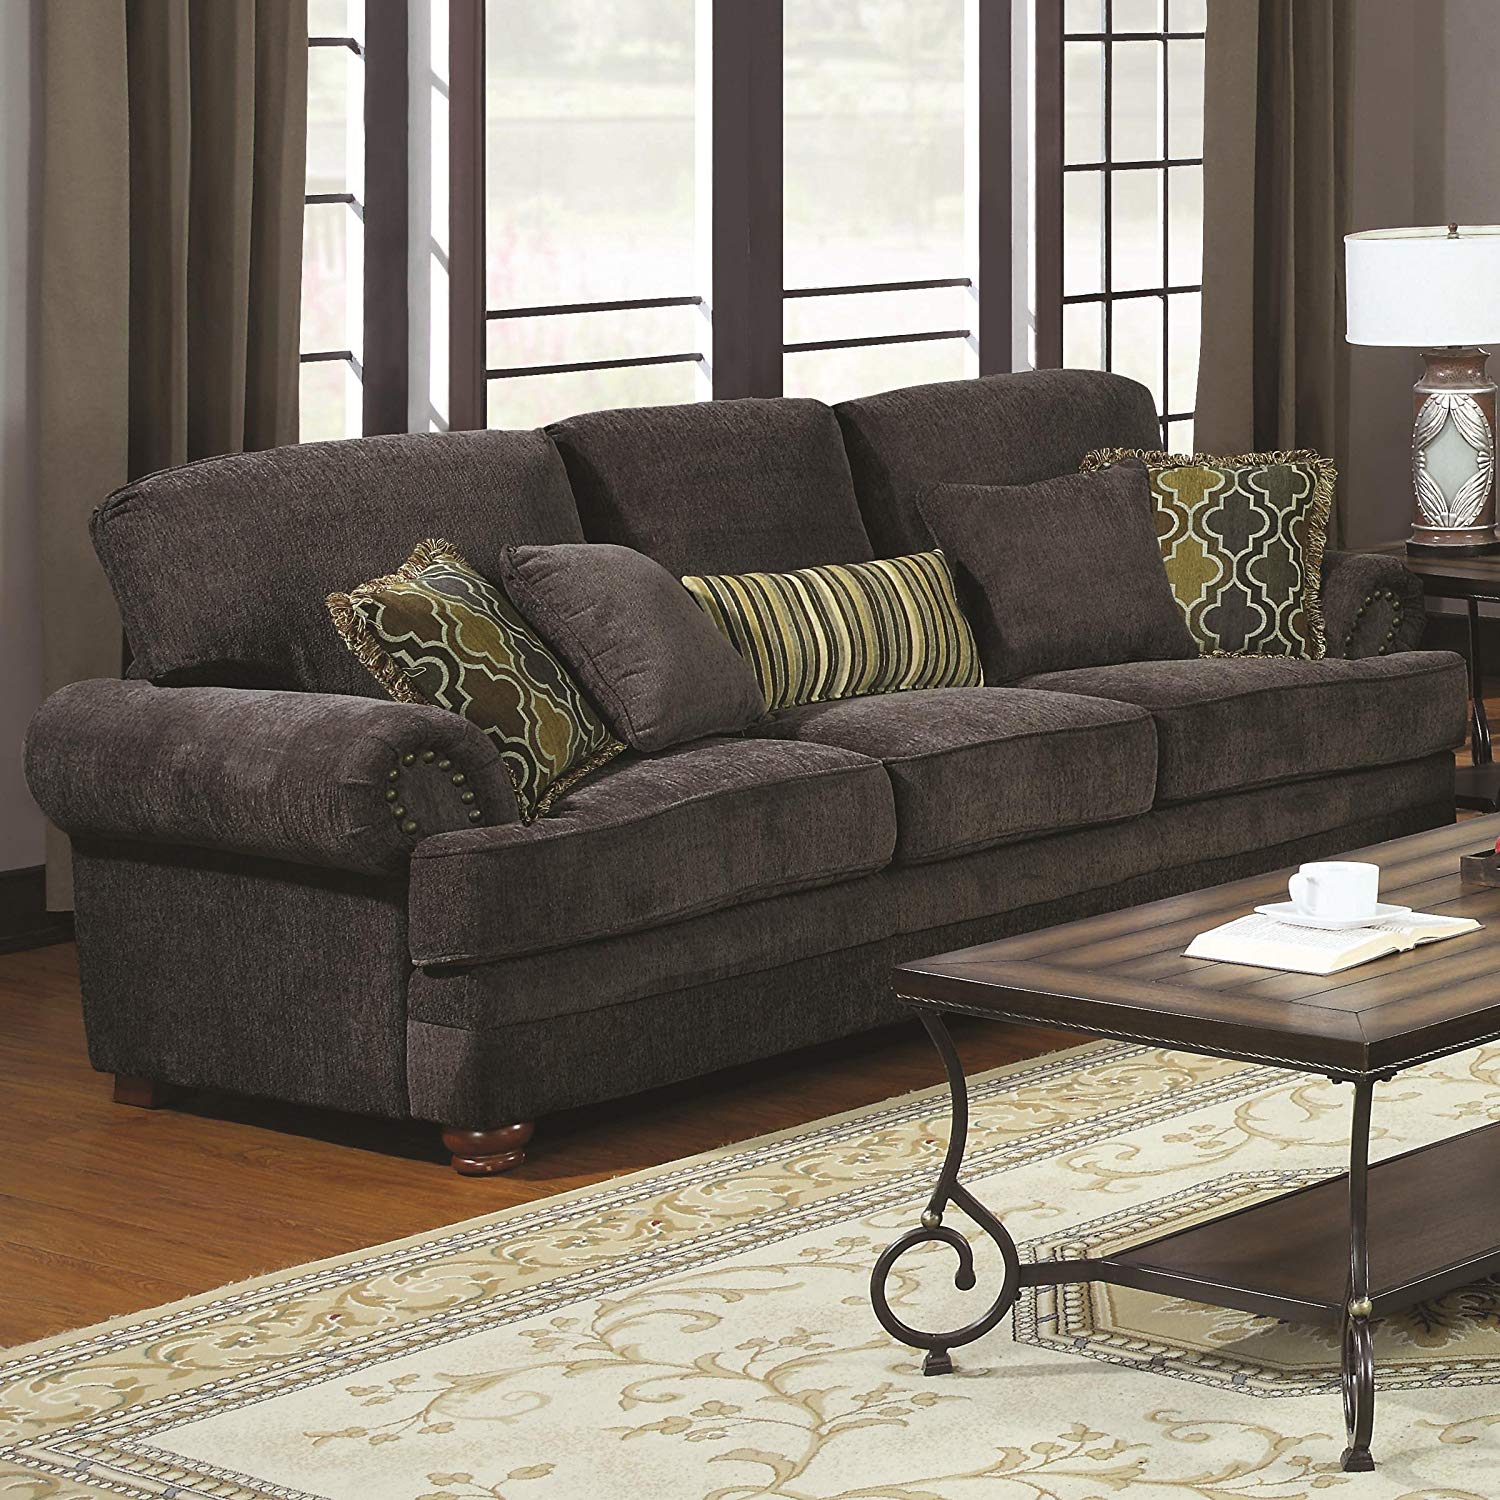 gray couch amazon.com: Coaster Colton Traditional smoky gray sofa with an elegant design Style: FKCHTWG